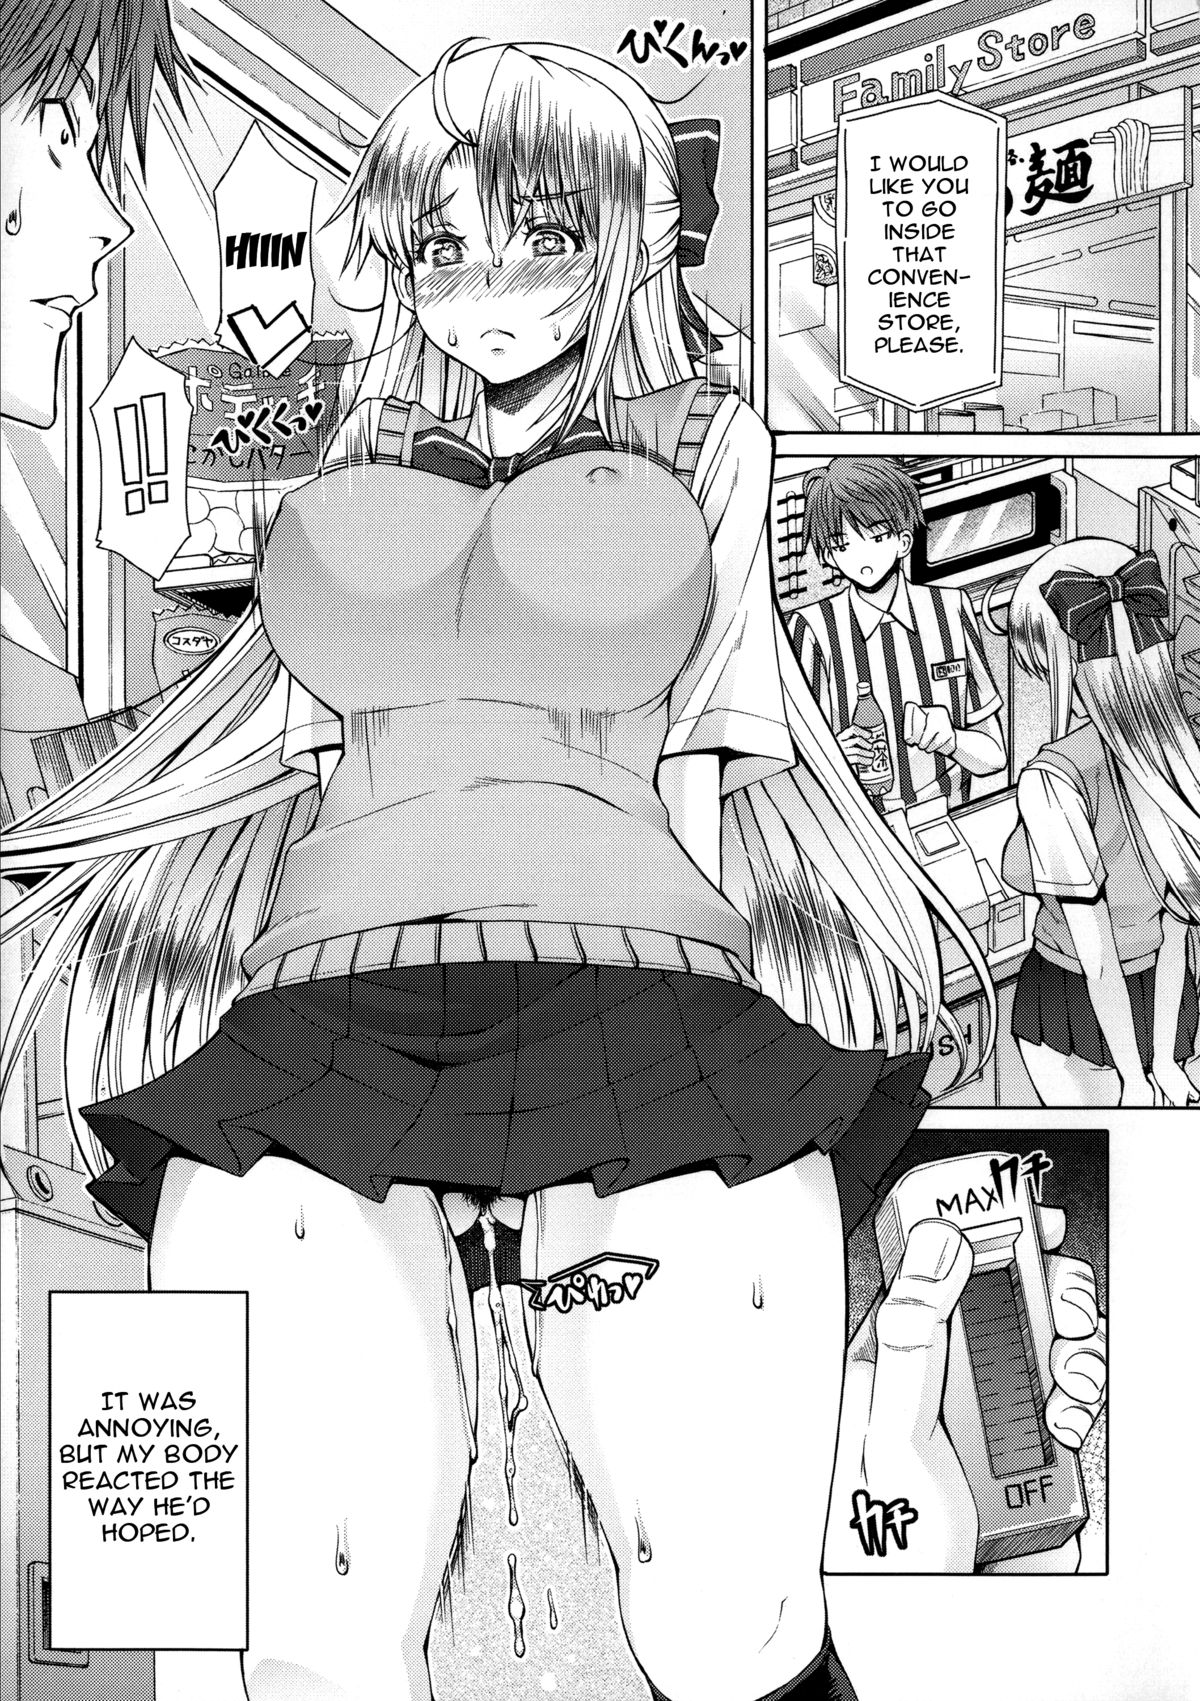 [RED-RUM] LOVE&PEACH Ch. 0-2 [English] {doujin-moe.us} page 16 full